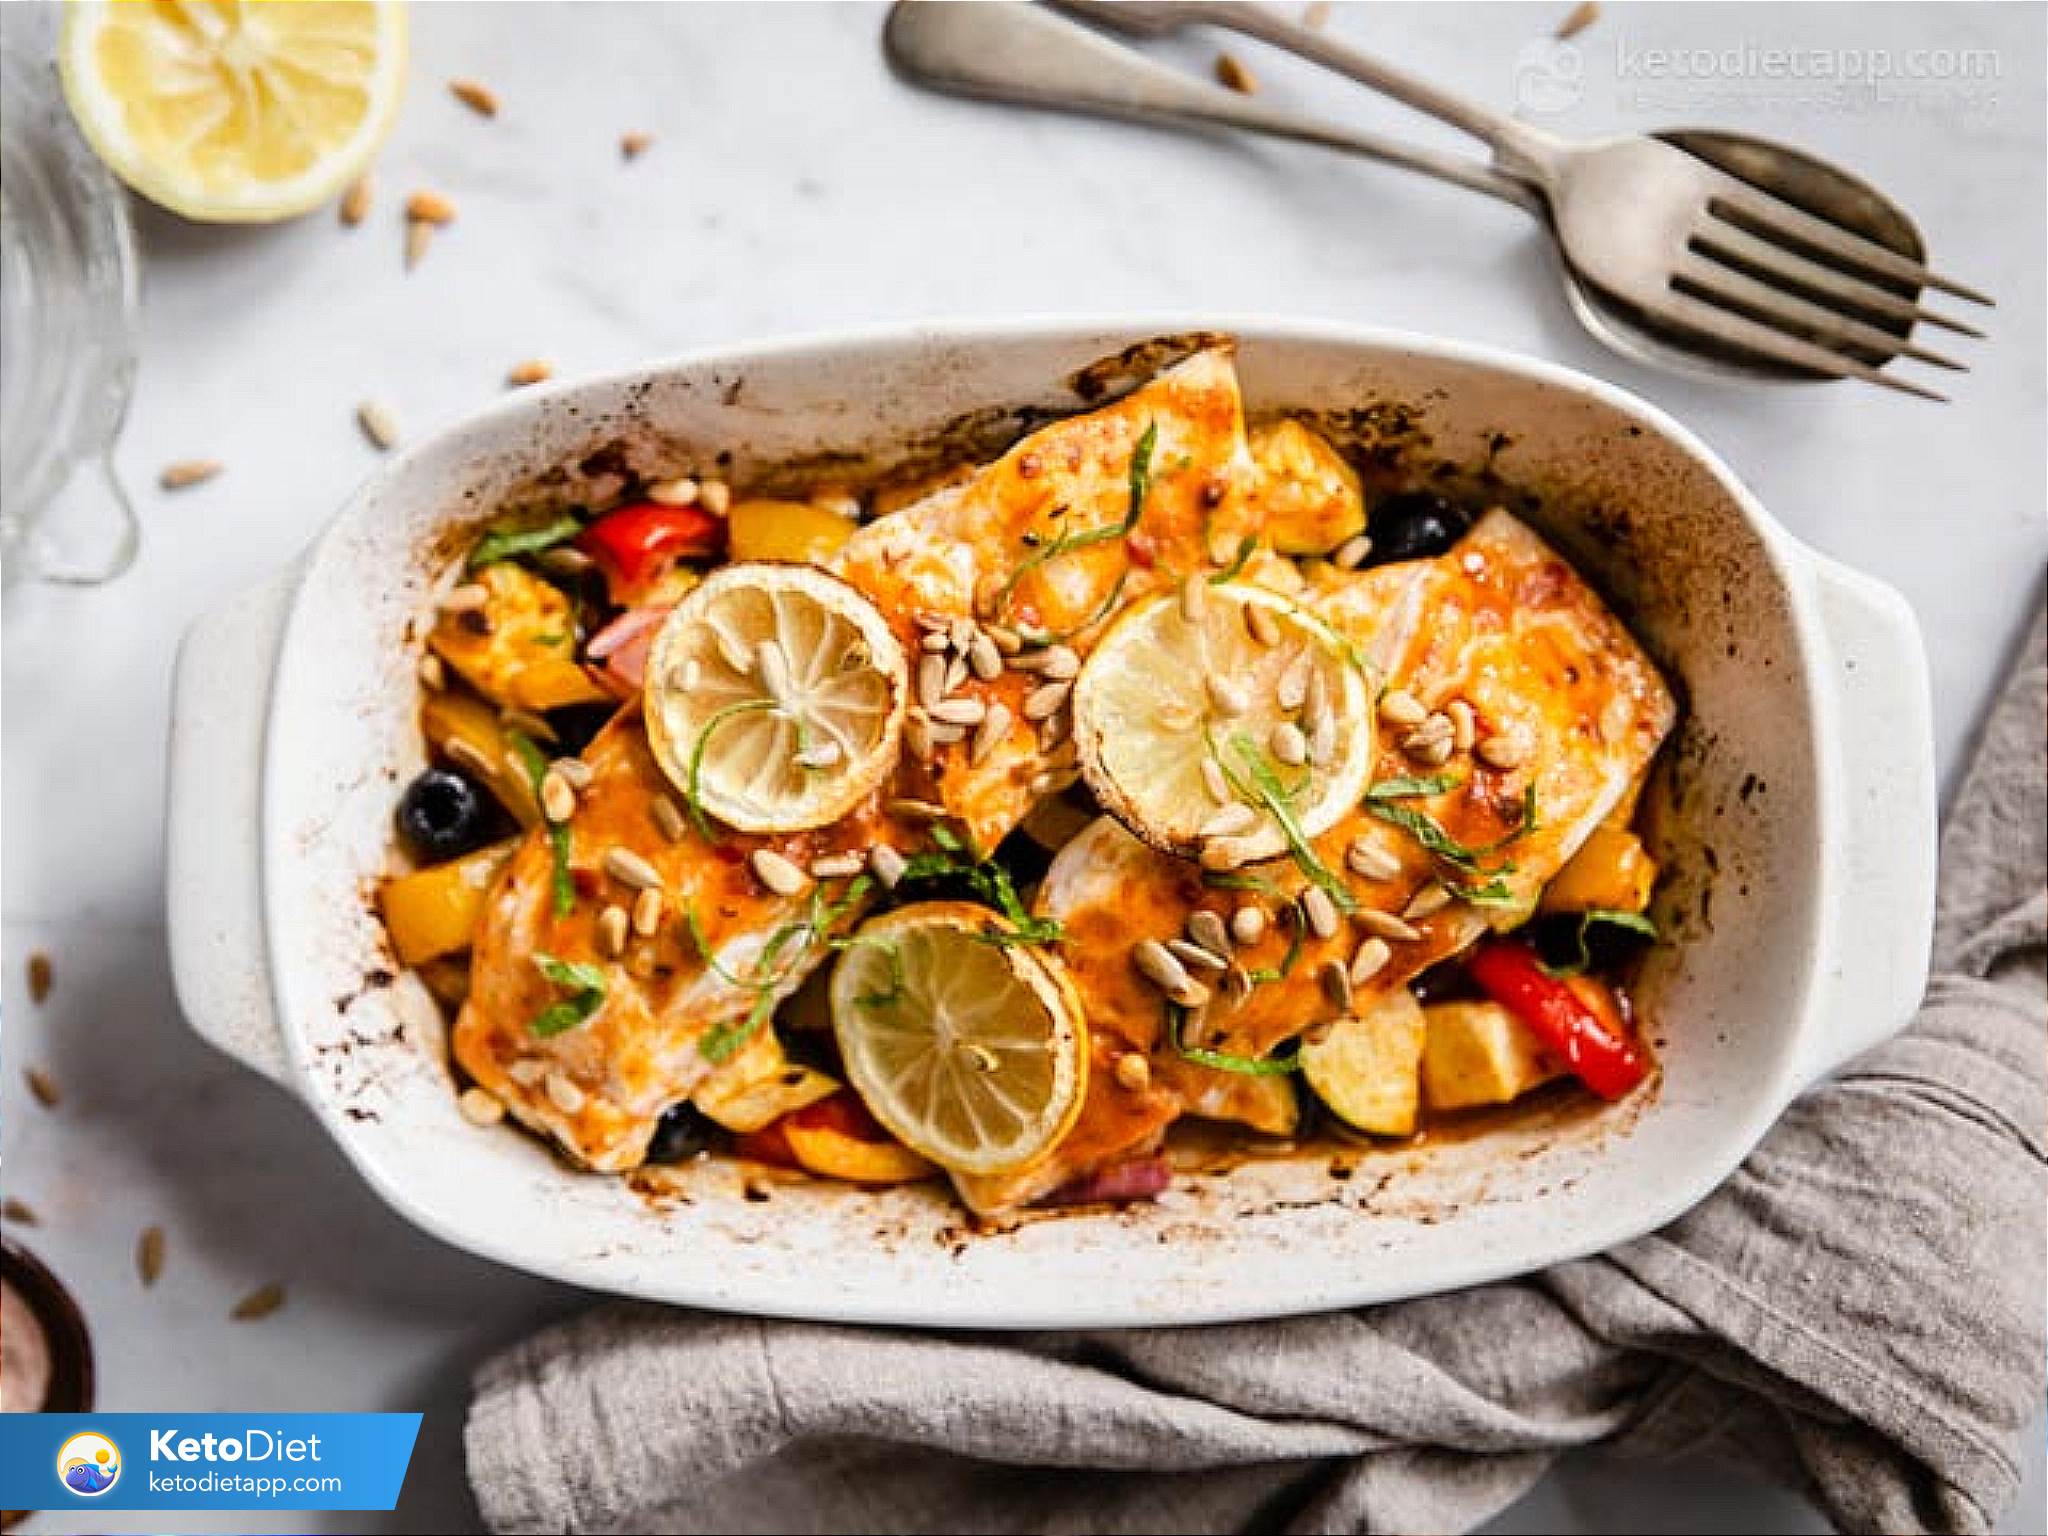 Low-Carb Moroccan Fish One Tray Bake